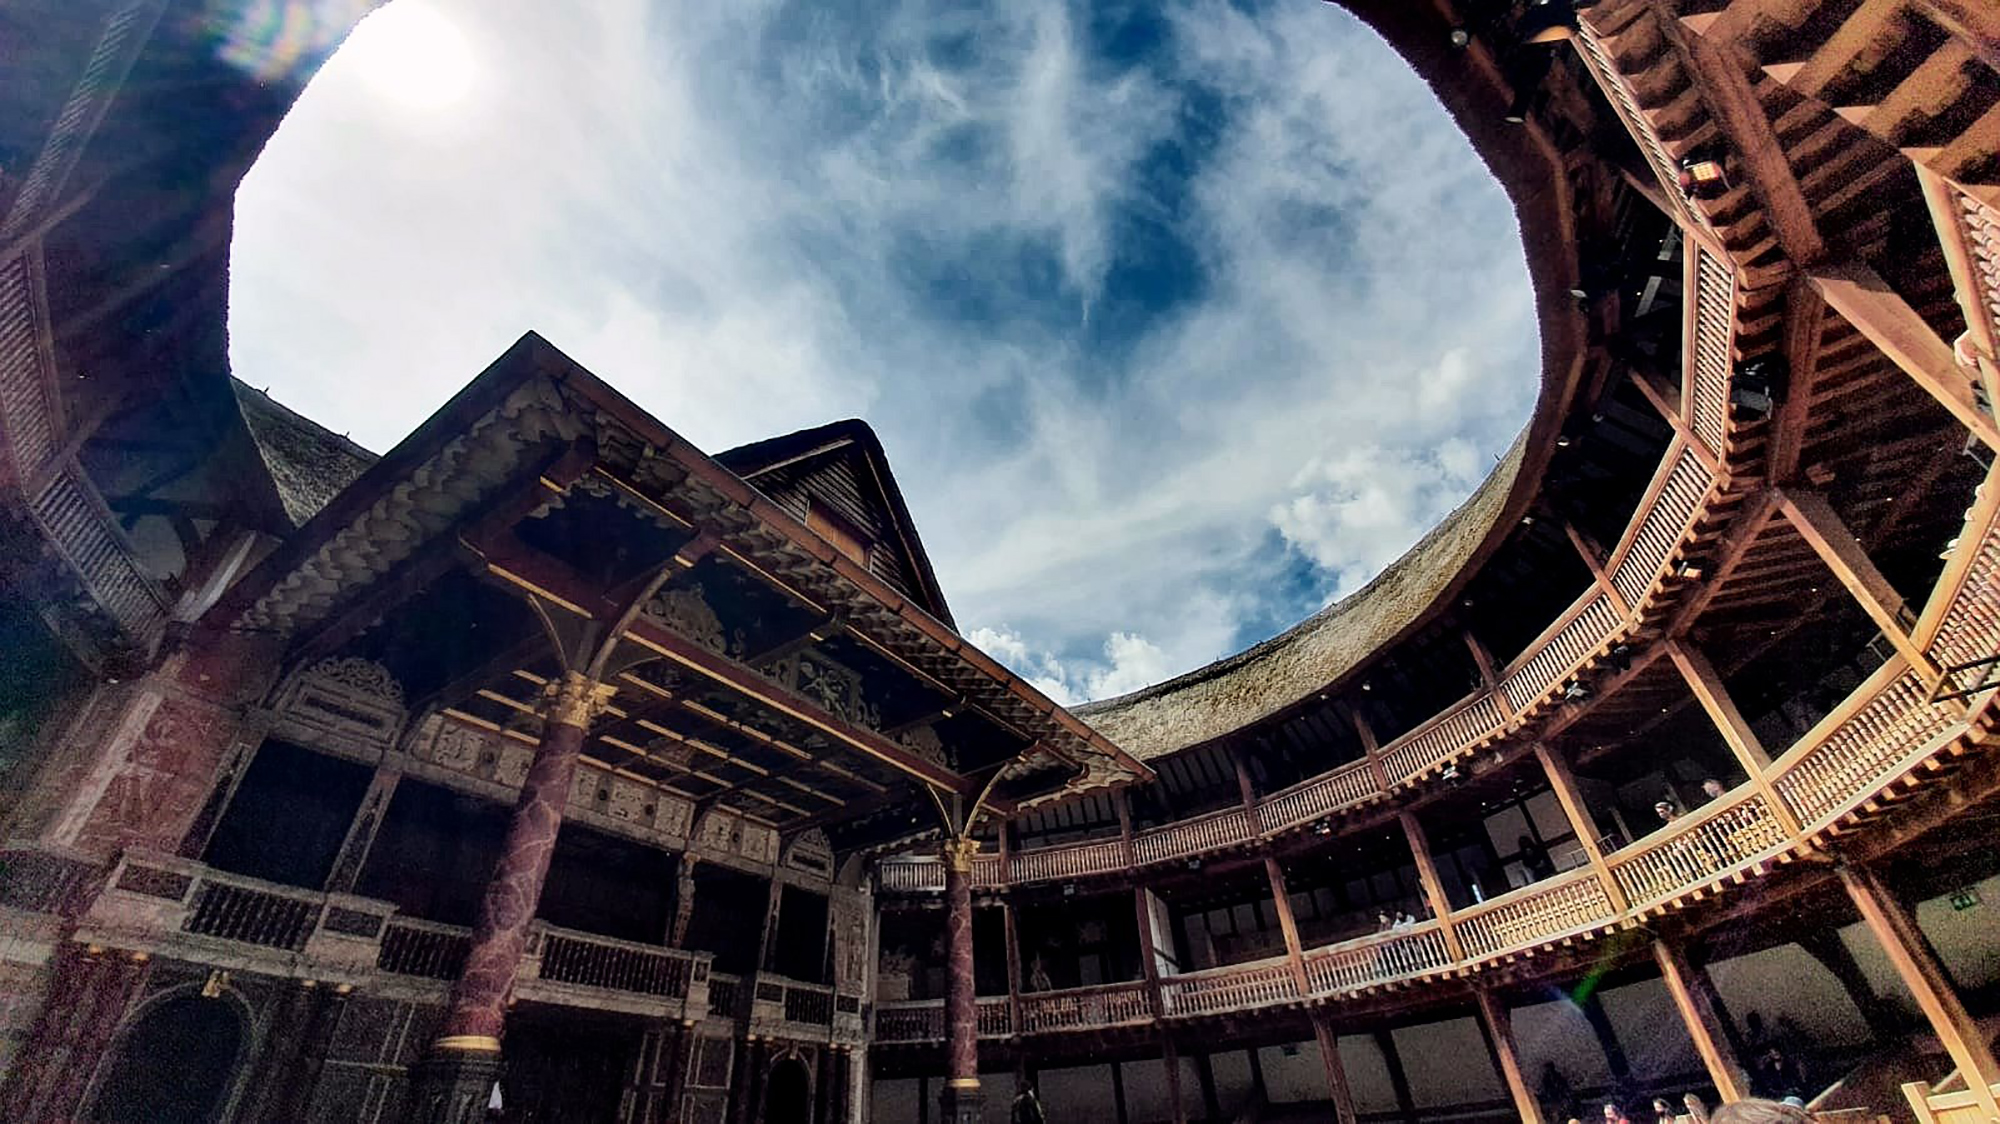 A blue sky streaked with wisps of white cloud above the circular timbre structure of the Globe Theatre.